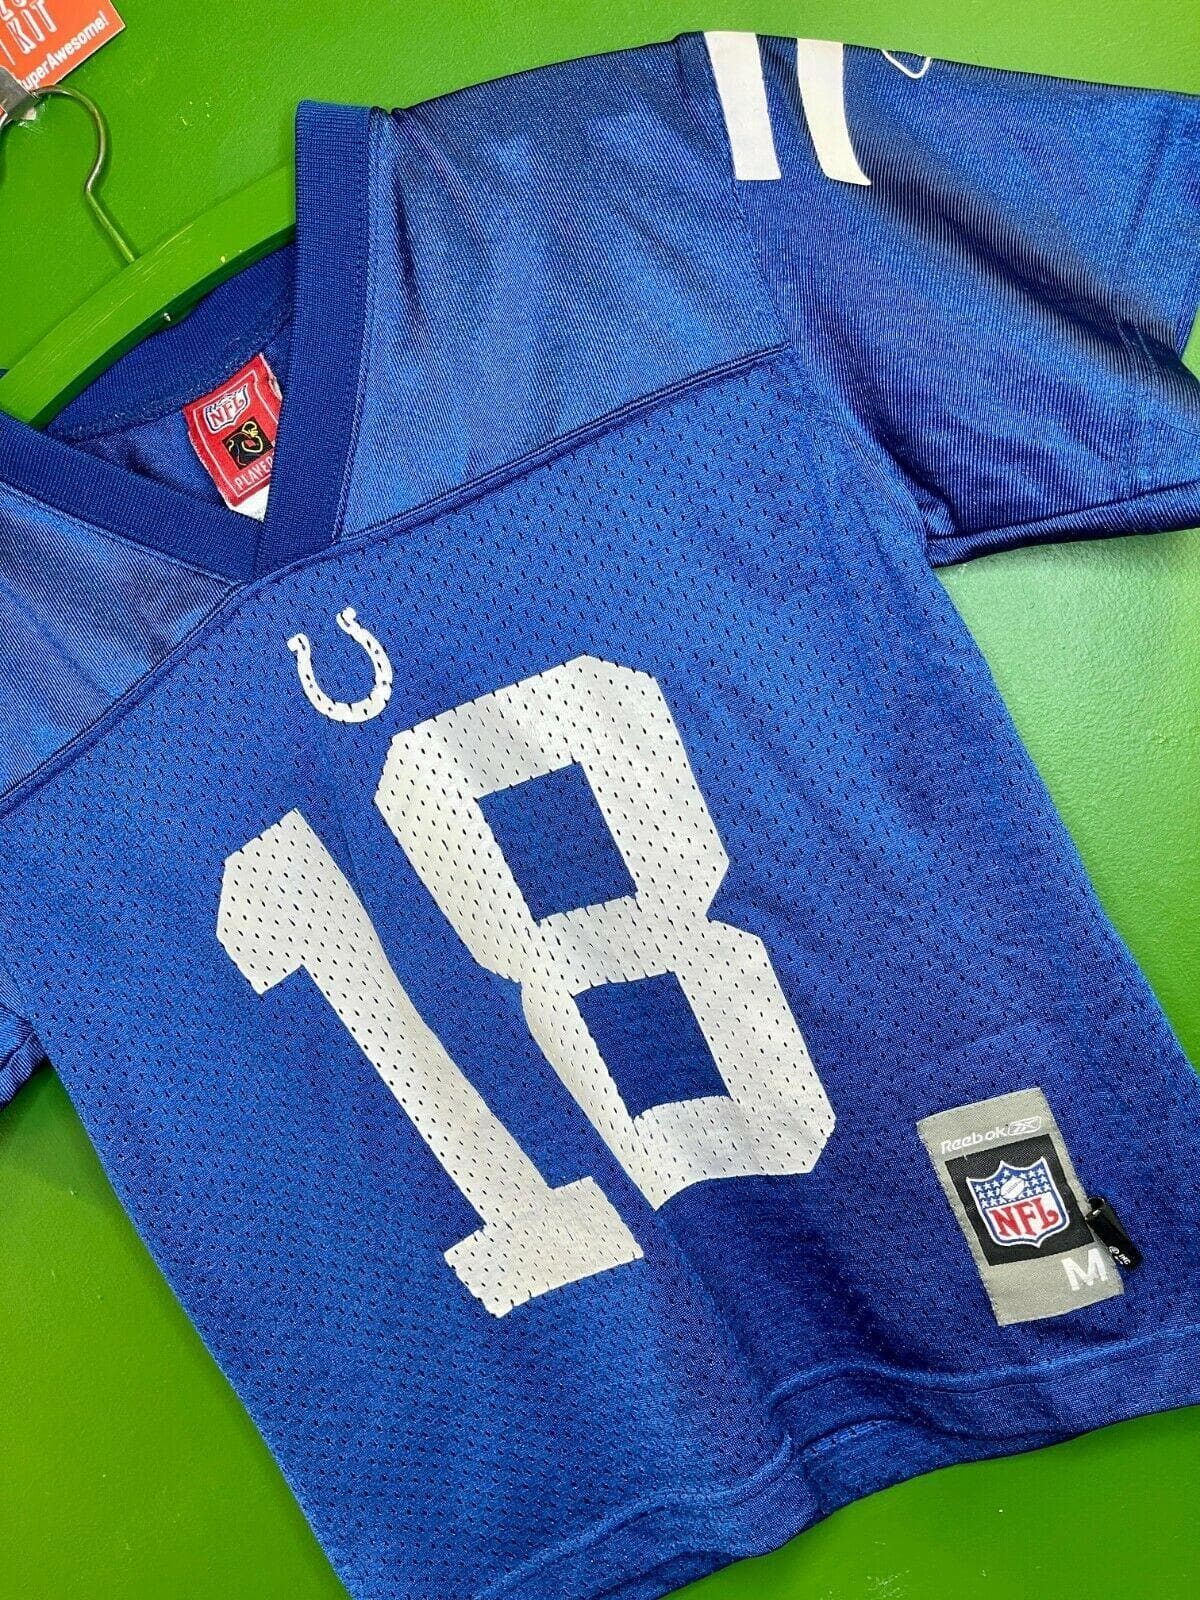 NFL Indianapolis Colts Peyton Manning #18 Reebok Jersey Youth Med 10-12